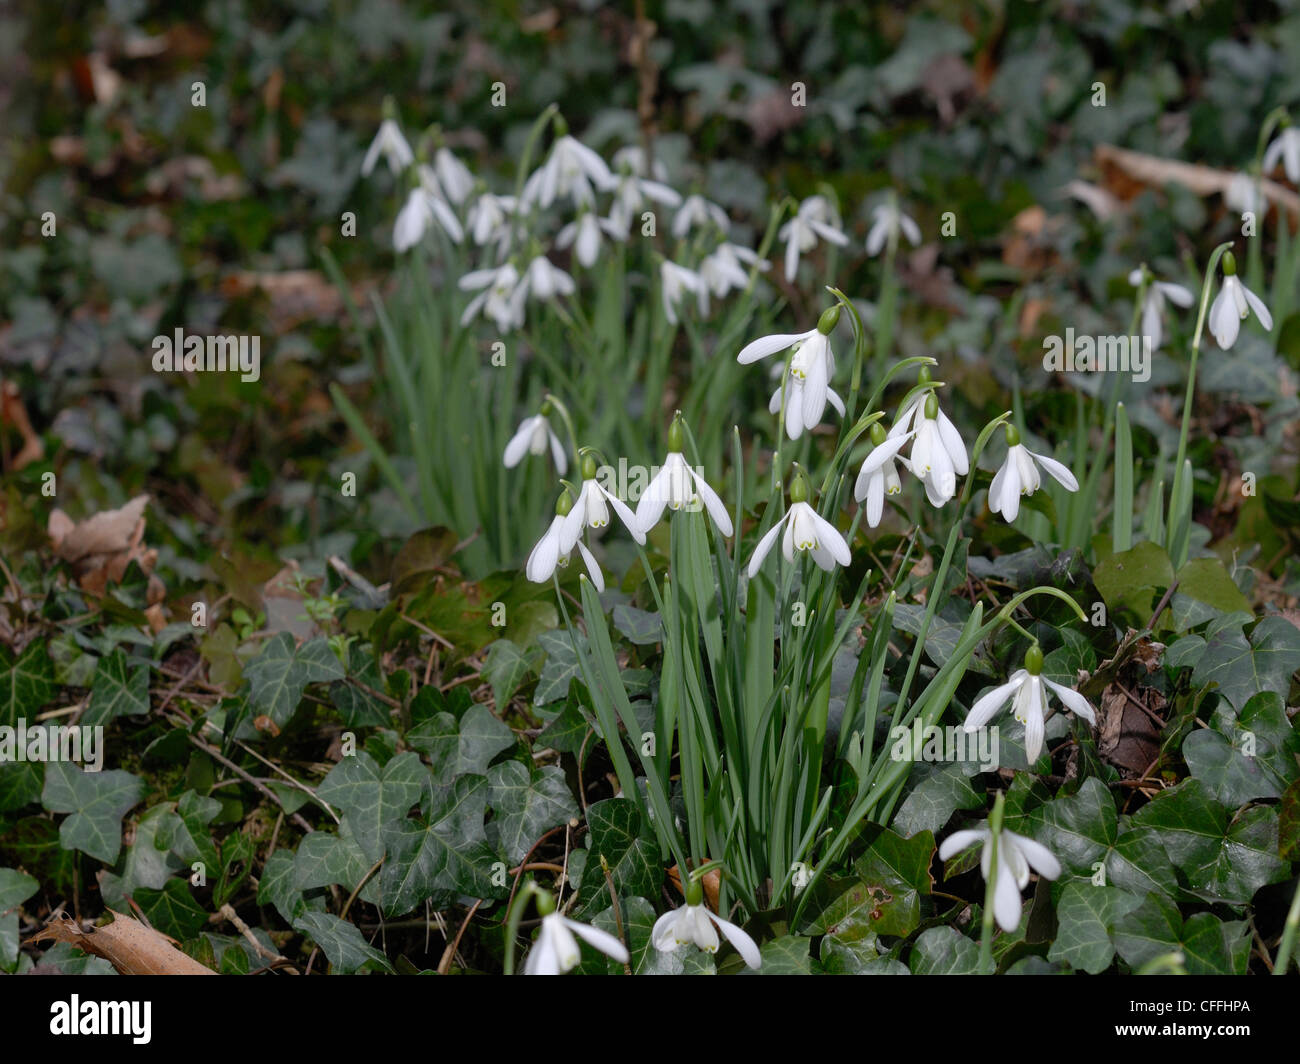 A small clump of snowdrops Stock Photo